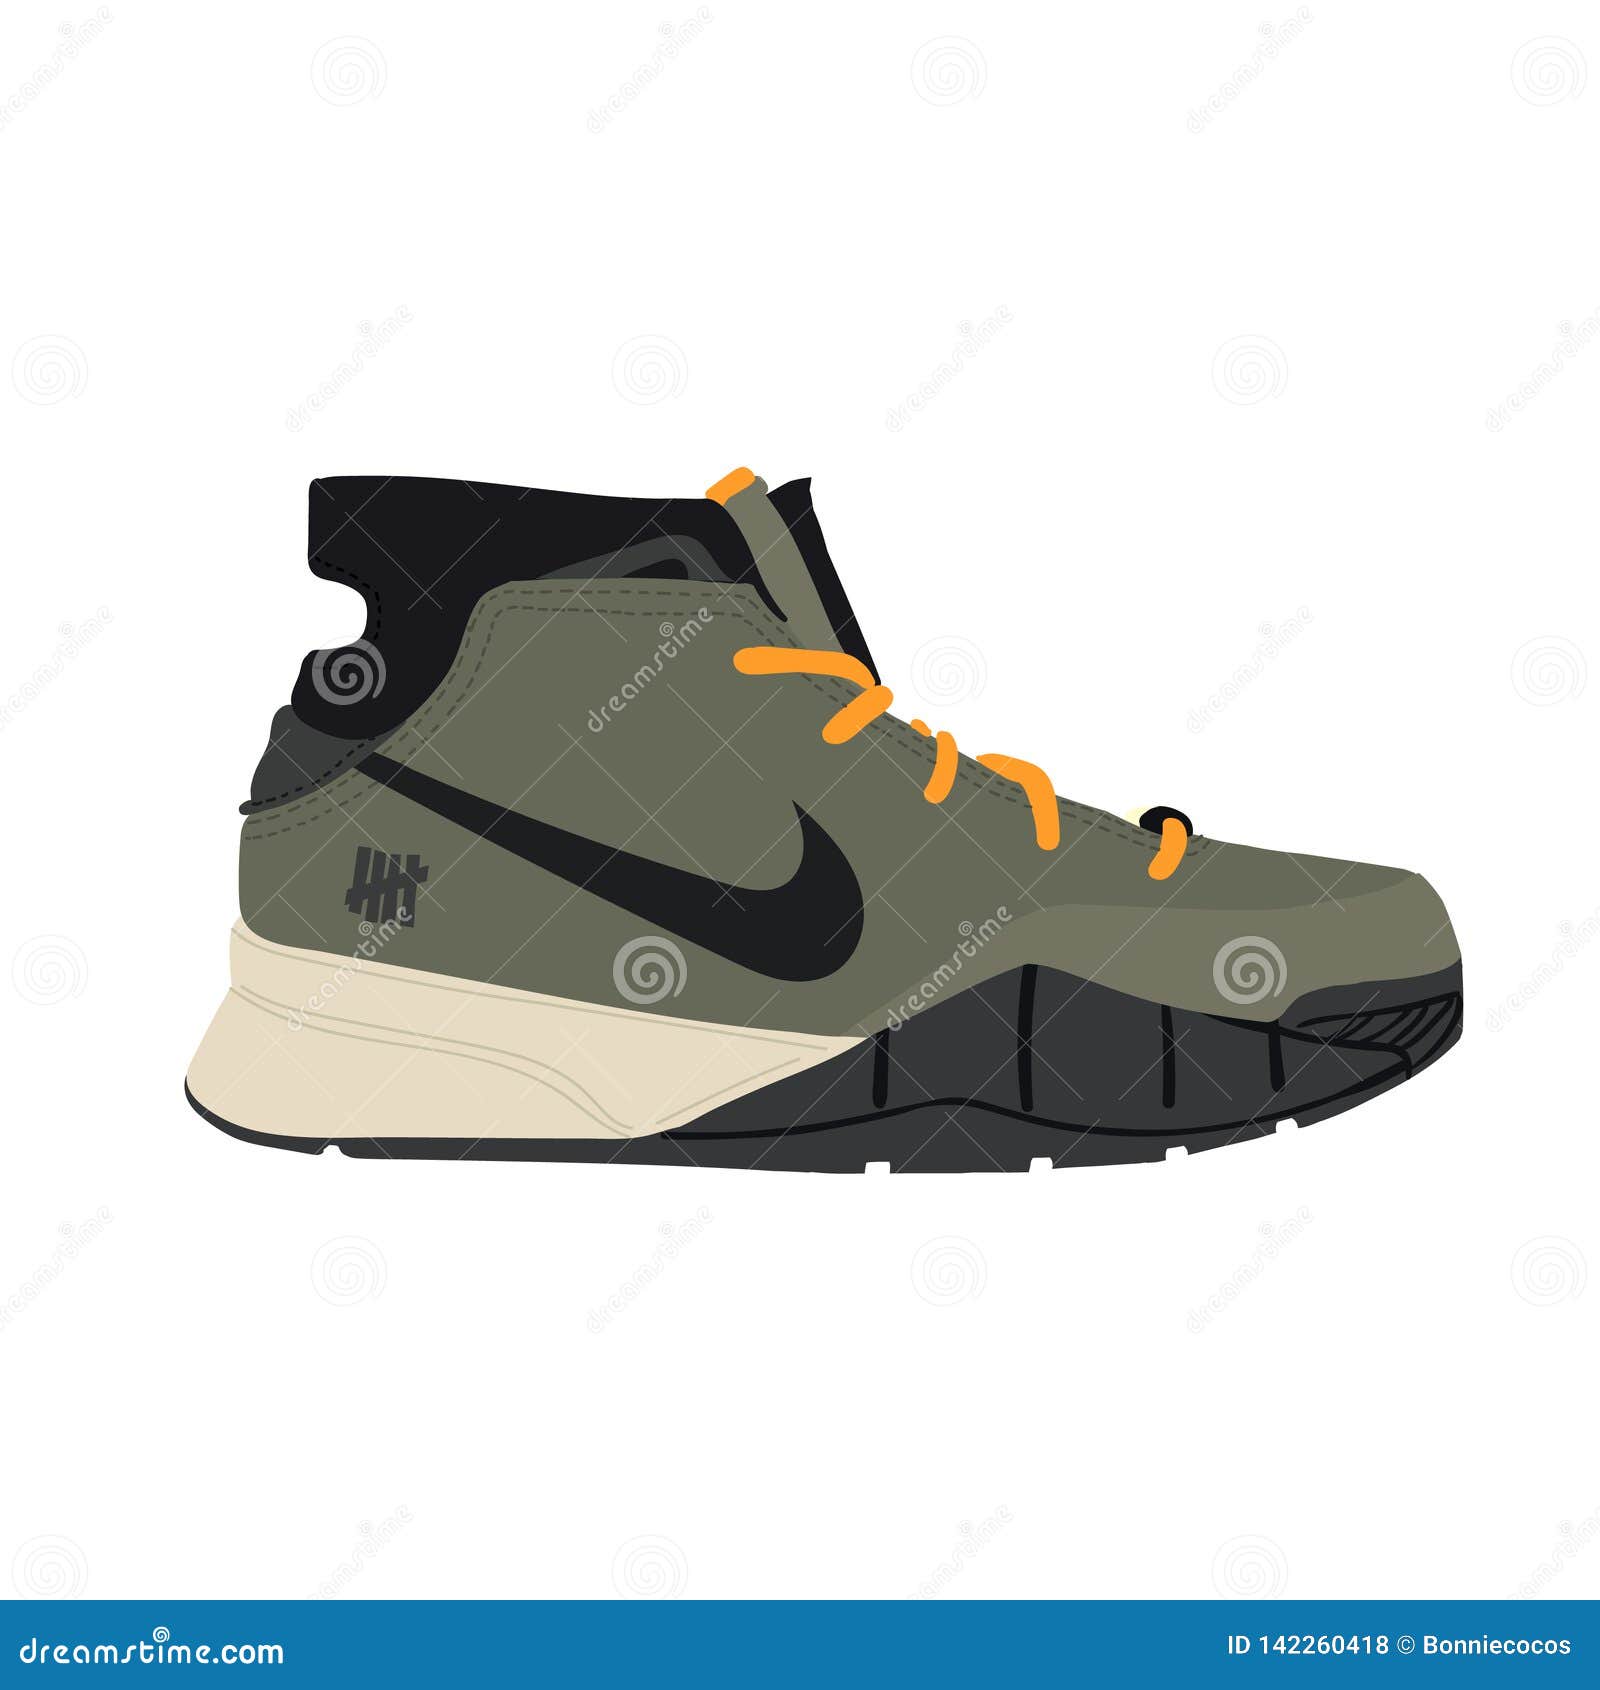 Nike Trainer. Flat Design. Vector Illustration Editorial Stock Photo - Illustration of shoes, athletic: 142260418